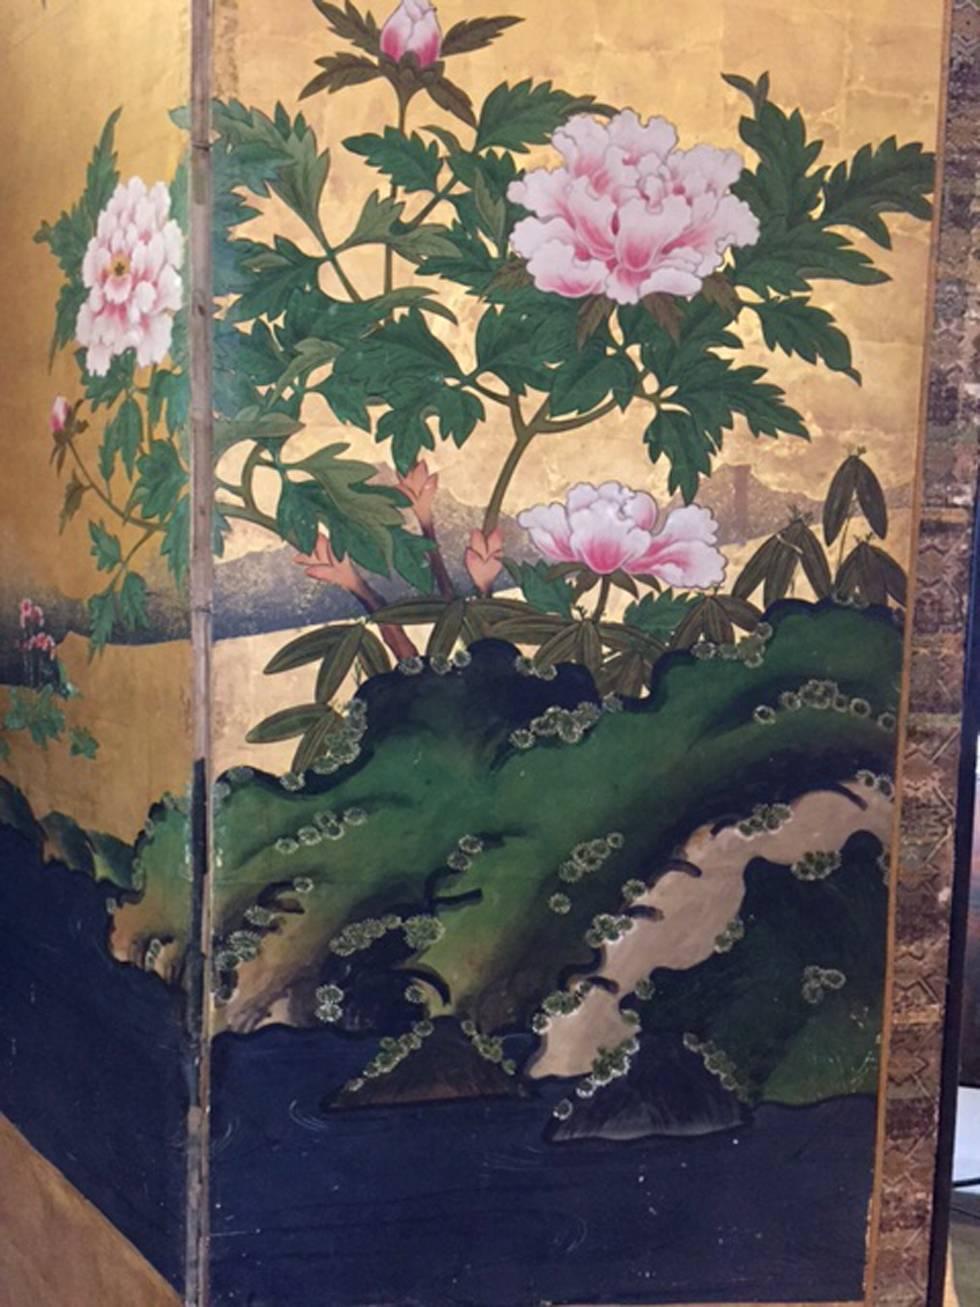 This six panel screen depicts the transition from spring to summer, circa 1750. This sensitivity to seasonal change is an important part of Shinto, Japan’s native belief system and painters often depicted a single environment transitioning from